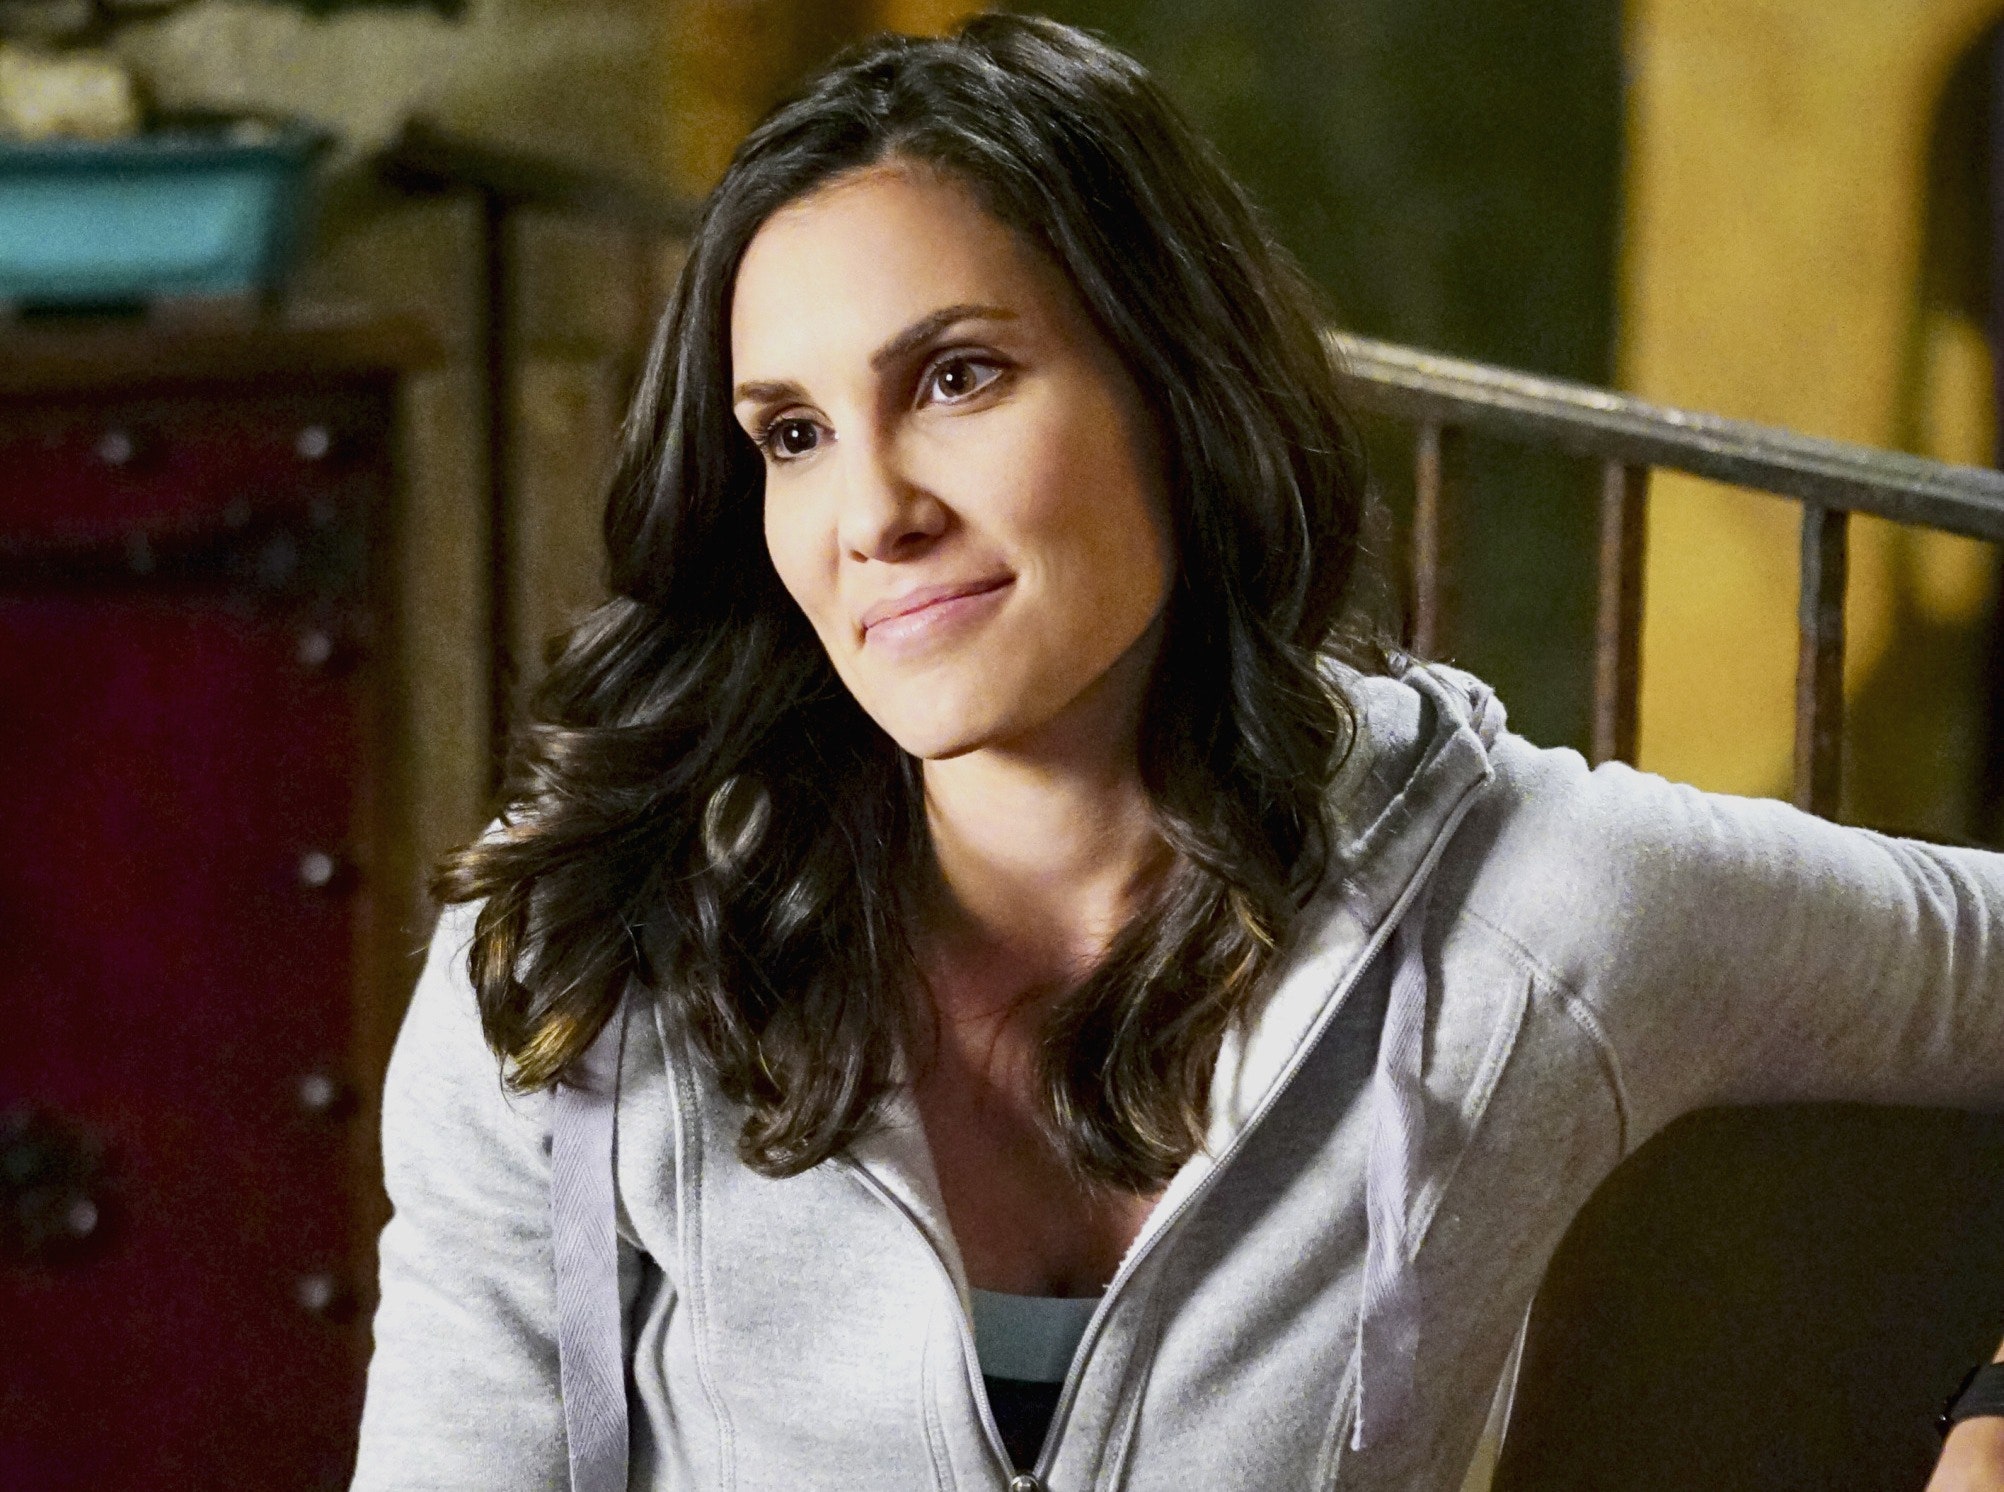 caroline cate recommends why is daniela ruah leaving ncis pic